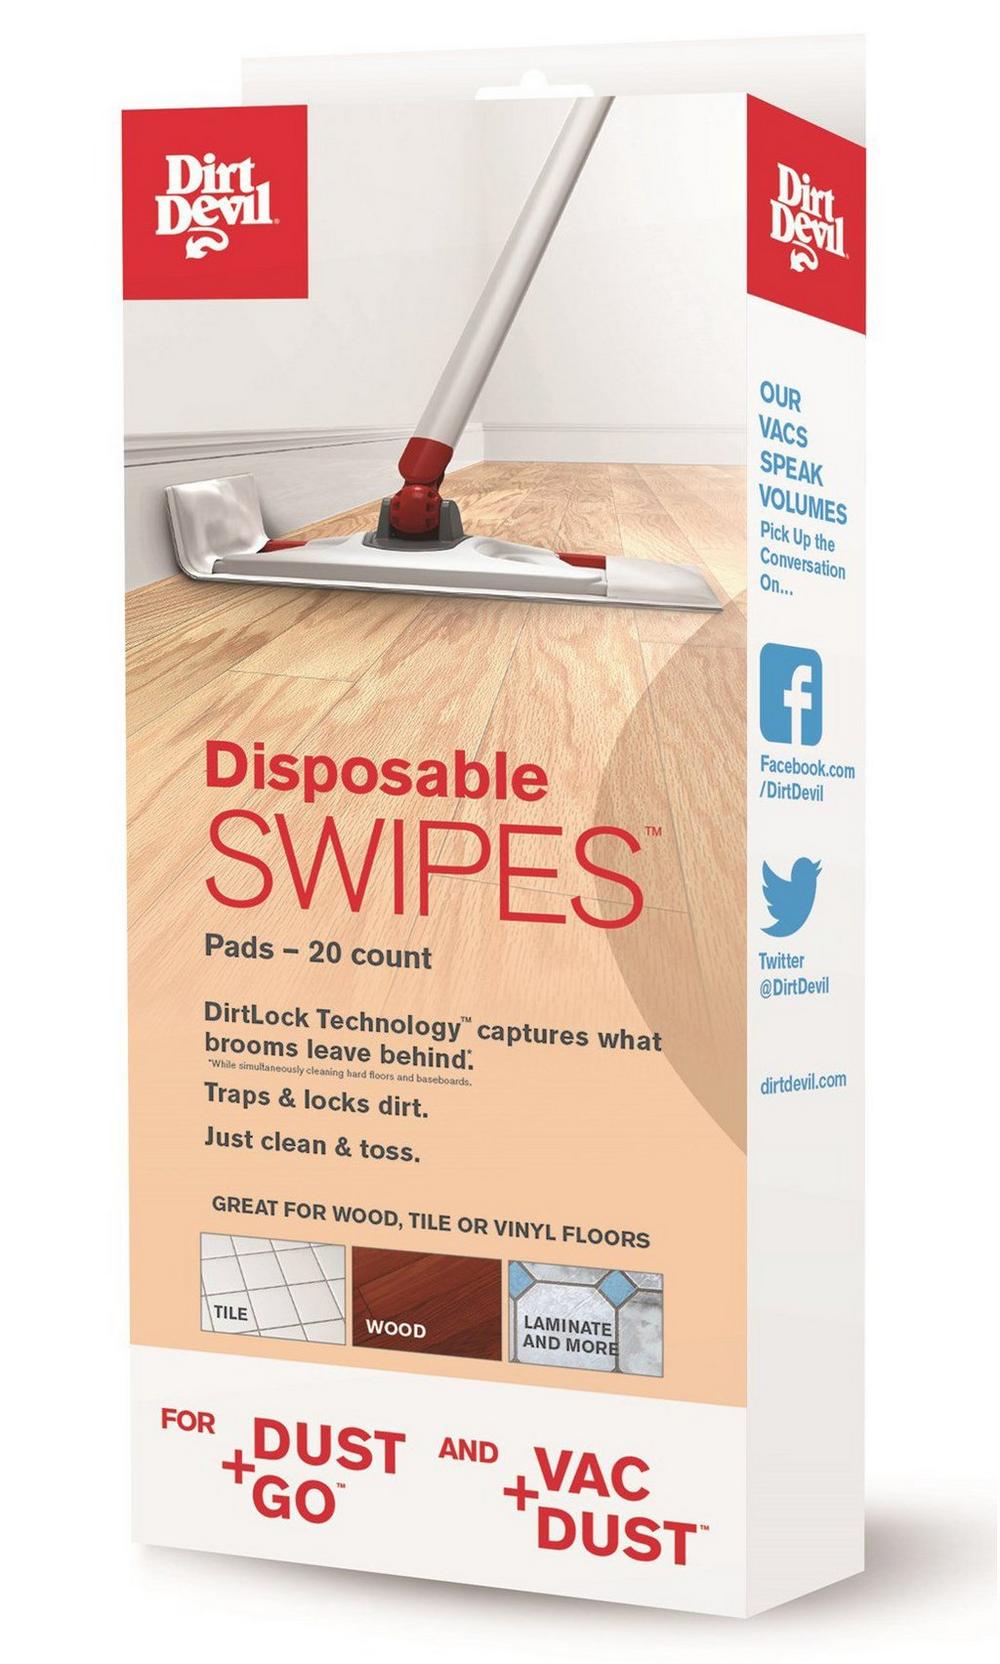 Disposable SWIPES Pads for Vac+Dust & Dust+Go (20 count)